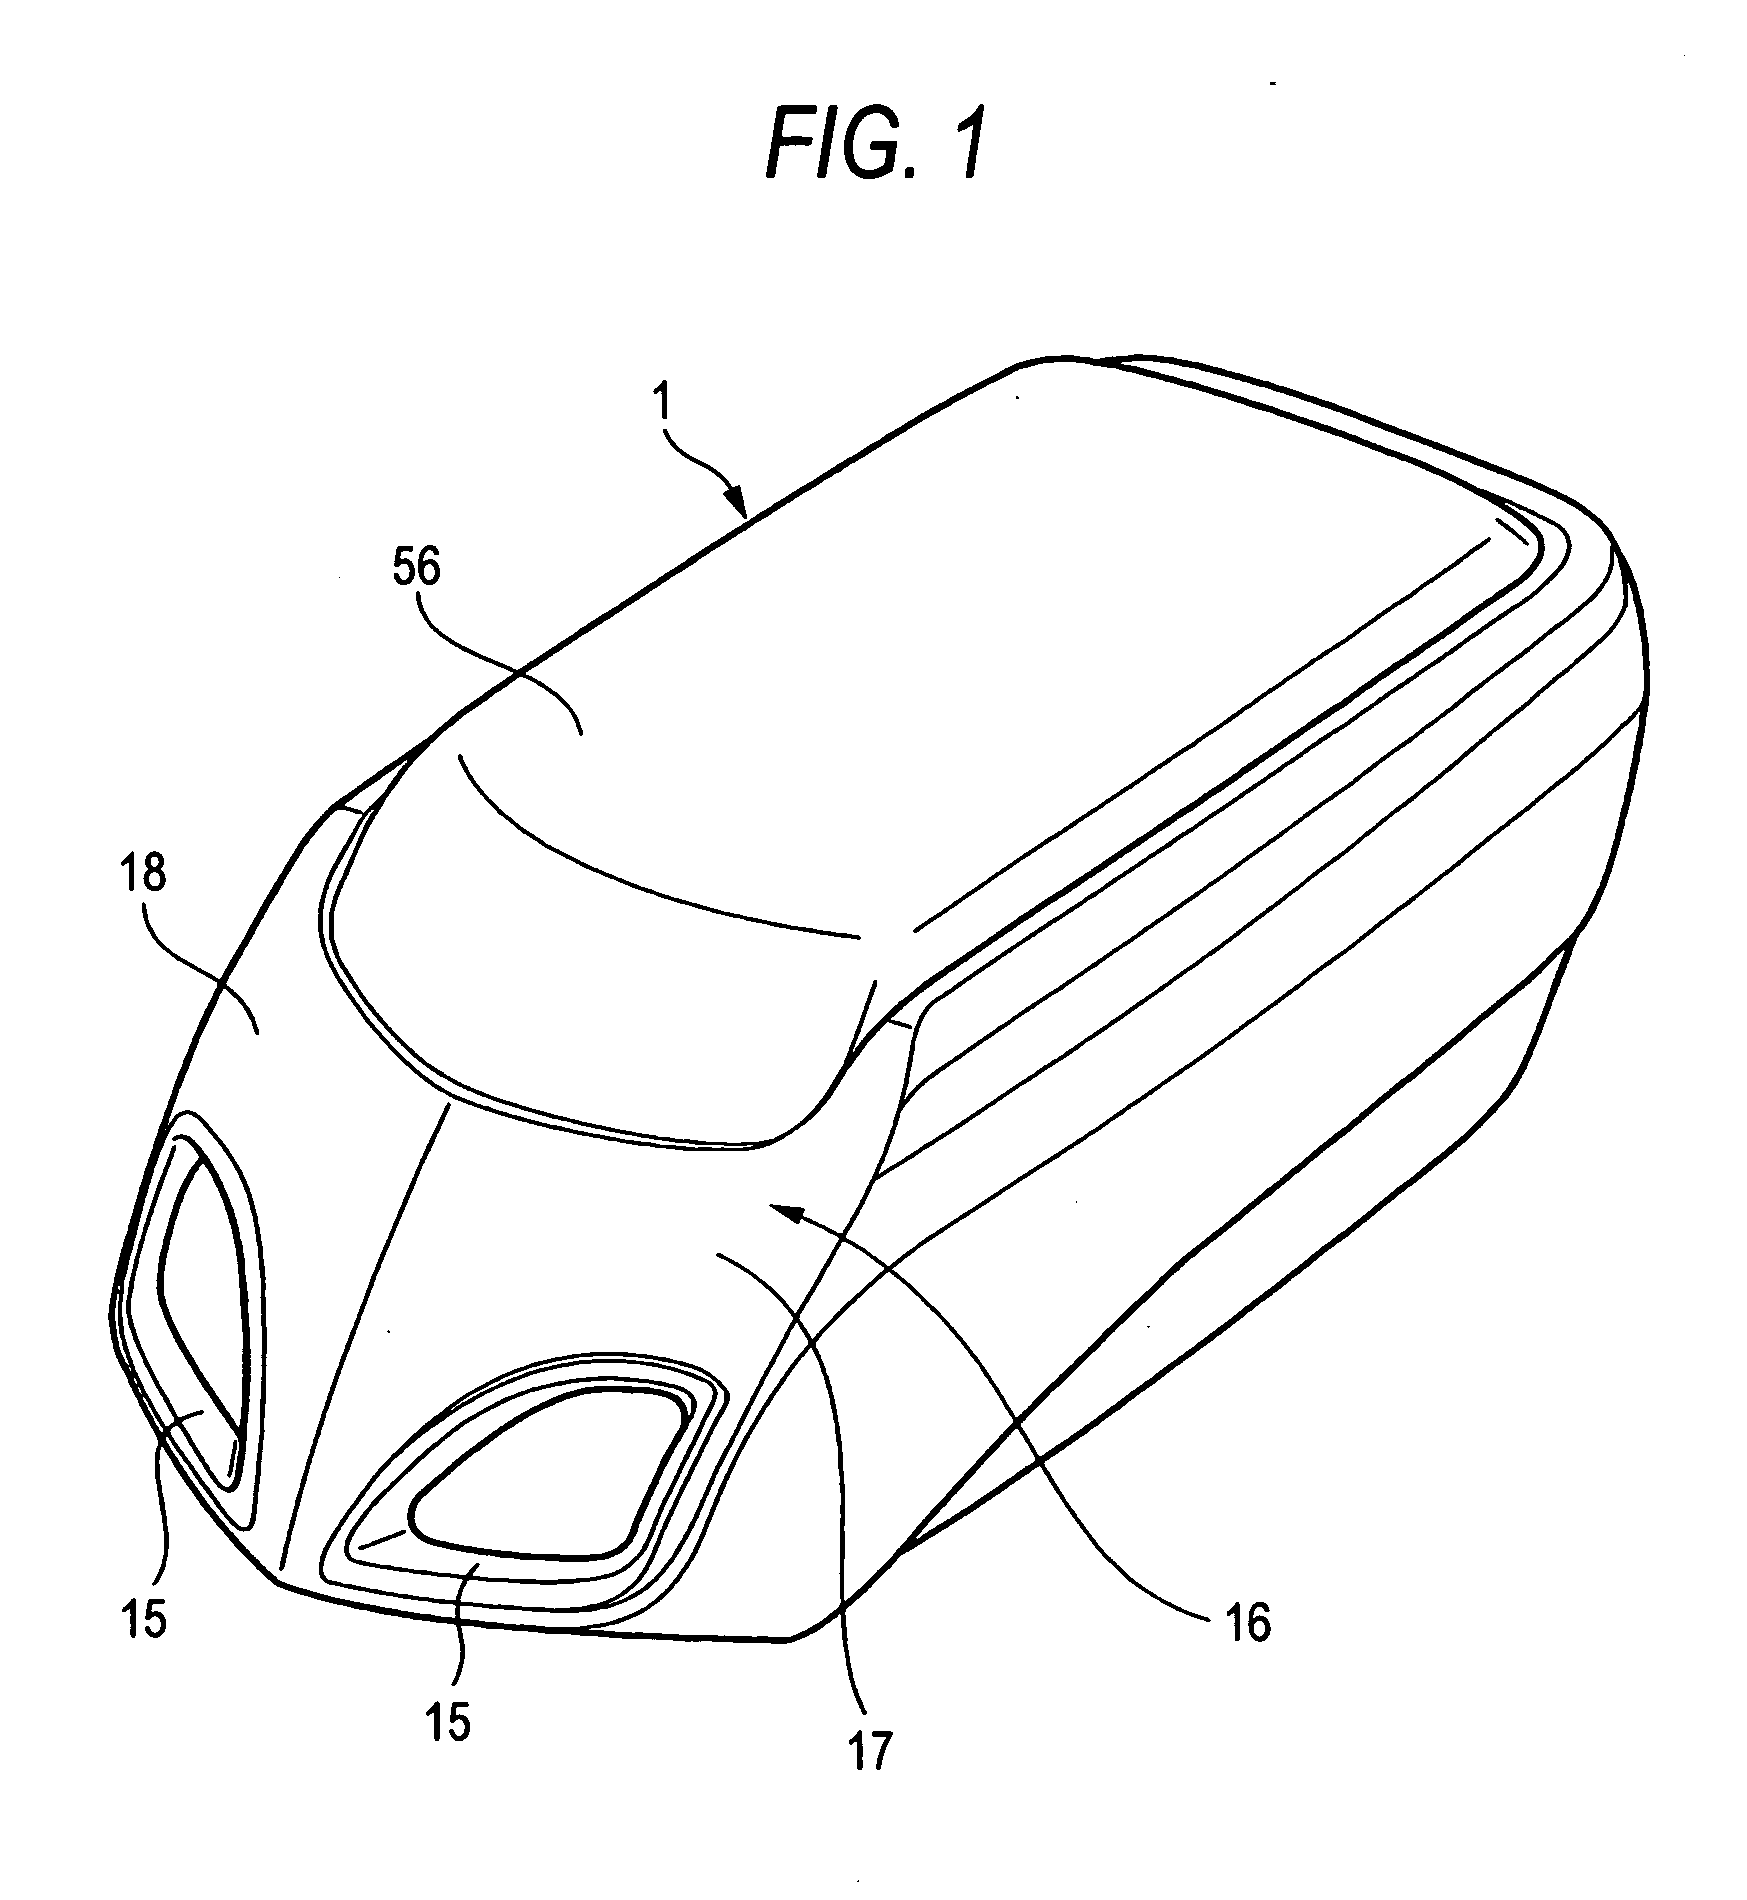 Low-frequency sound reproducing speaker apparatus